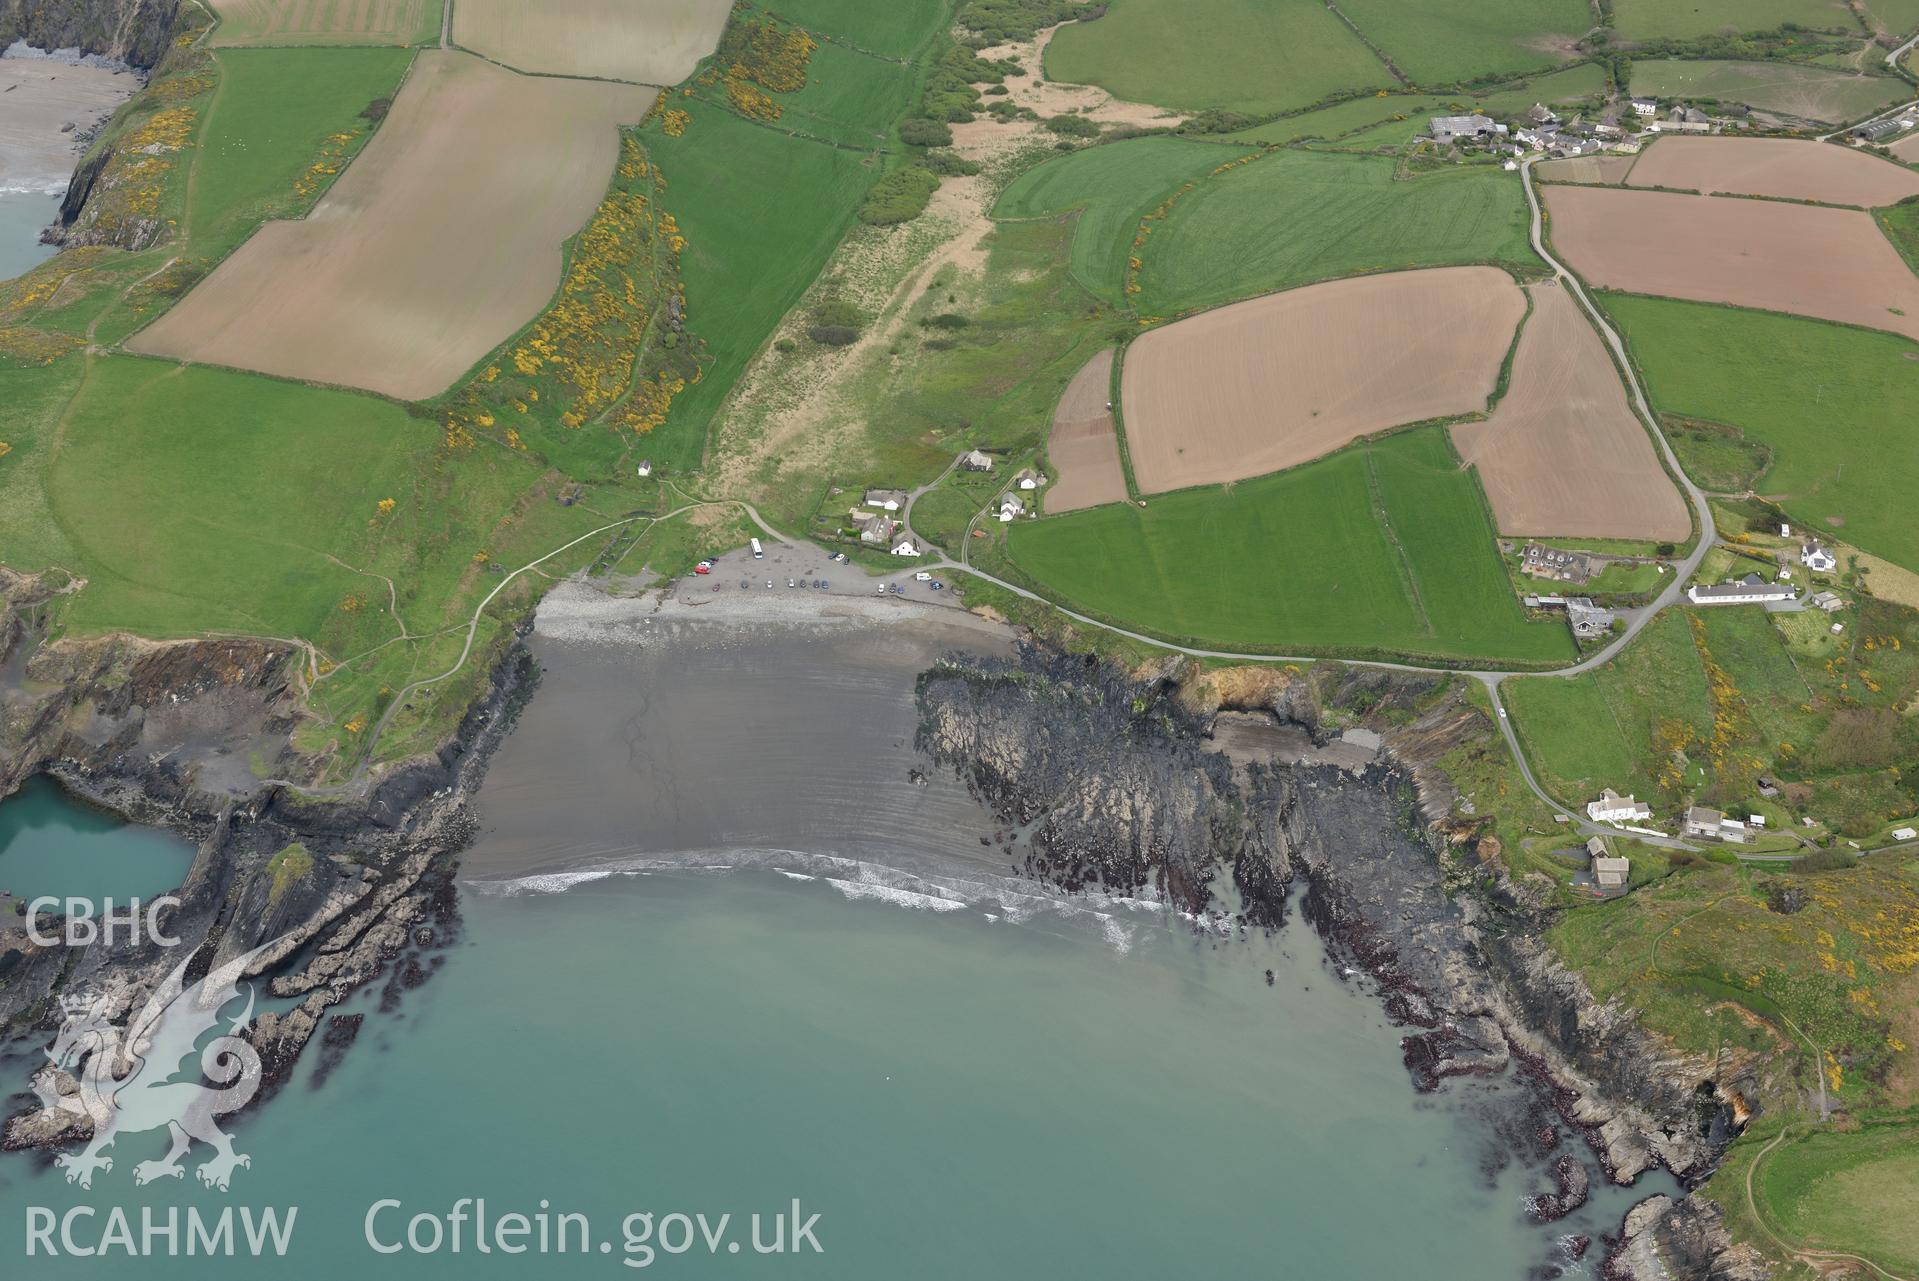 Abereiddy village. Baseline aerial reconnaissance survey for the CHERISH Project. ? Crown: CHERISH PROJECT 2017. Produced with EU funds through the Ireland Wales Co-operation Programme 2014-2020. All material made freely available through the Open Government Licence.